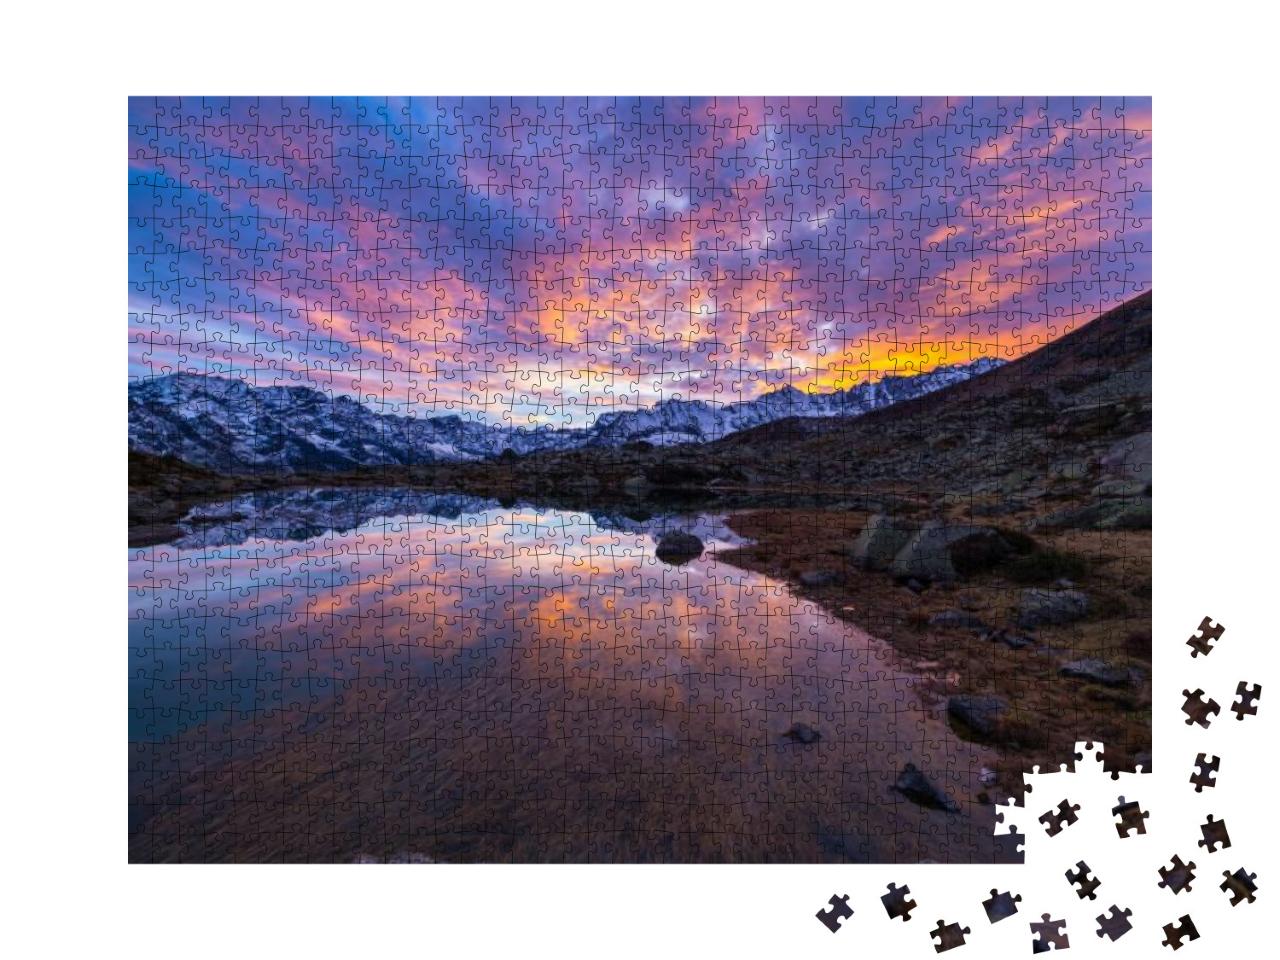 High Altitude Alpine Lake in Idyllic Land Once Covered by... Jigsaw Puzzle with 1000 pieces